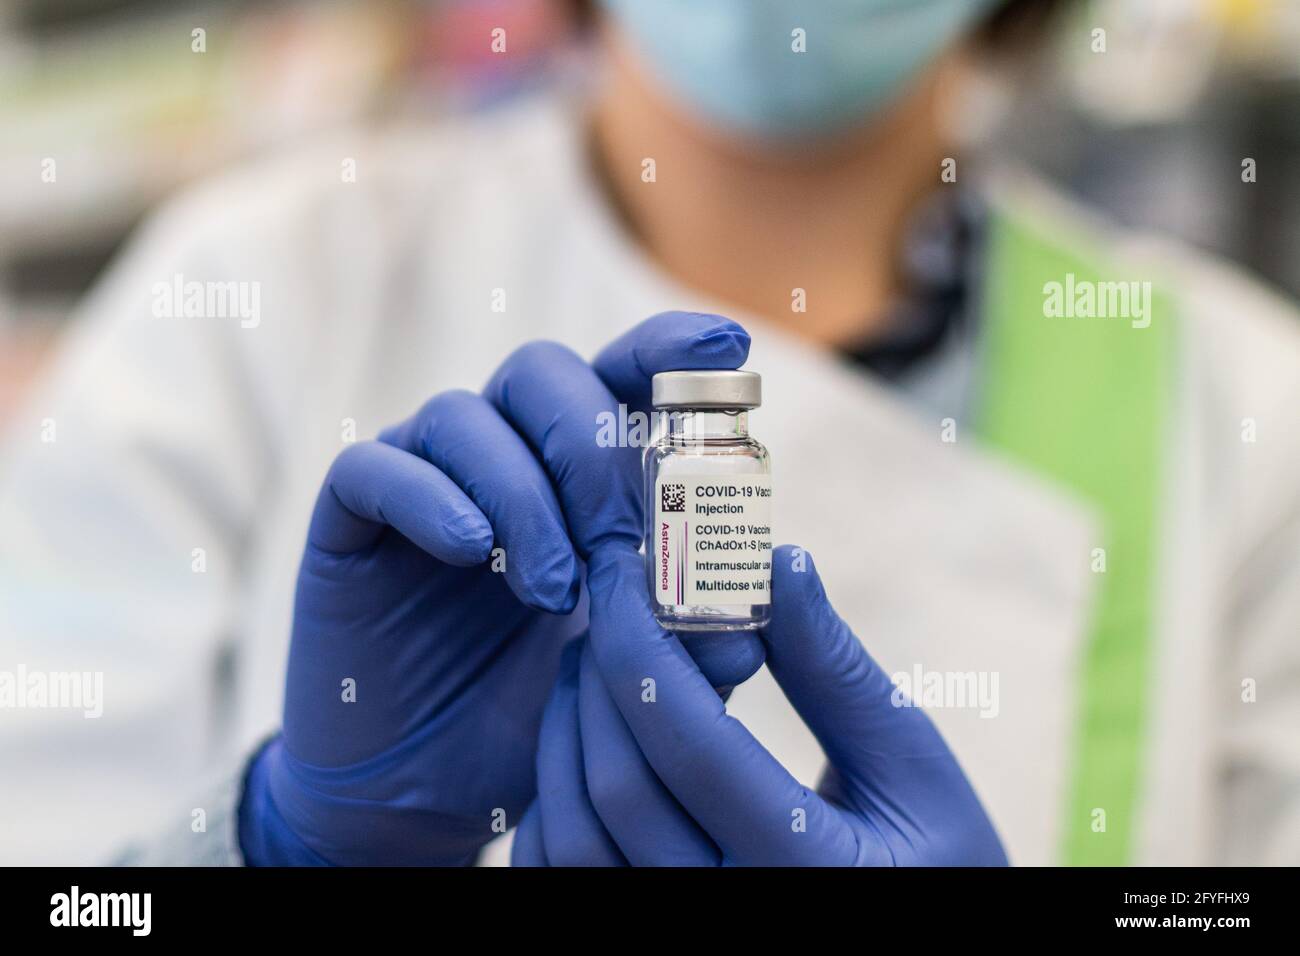 AstraZeneca ® vaccin against Covid-19 in a pharmacy, France, march 2021. Stock Photo